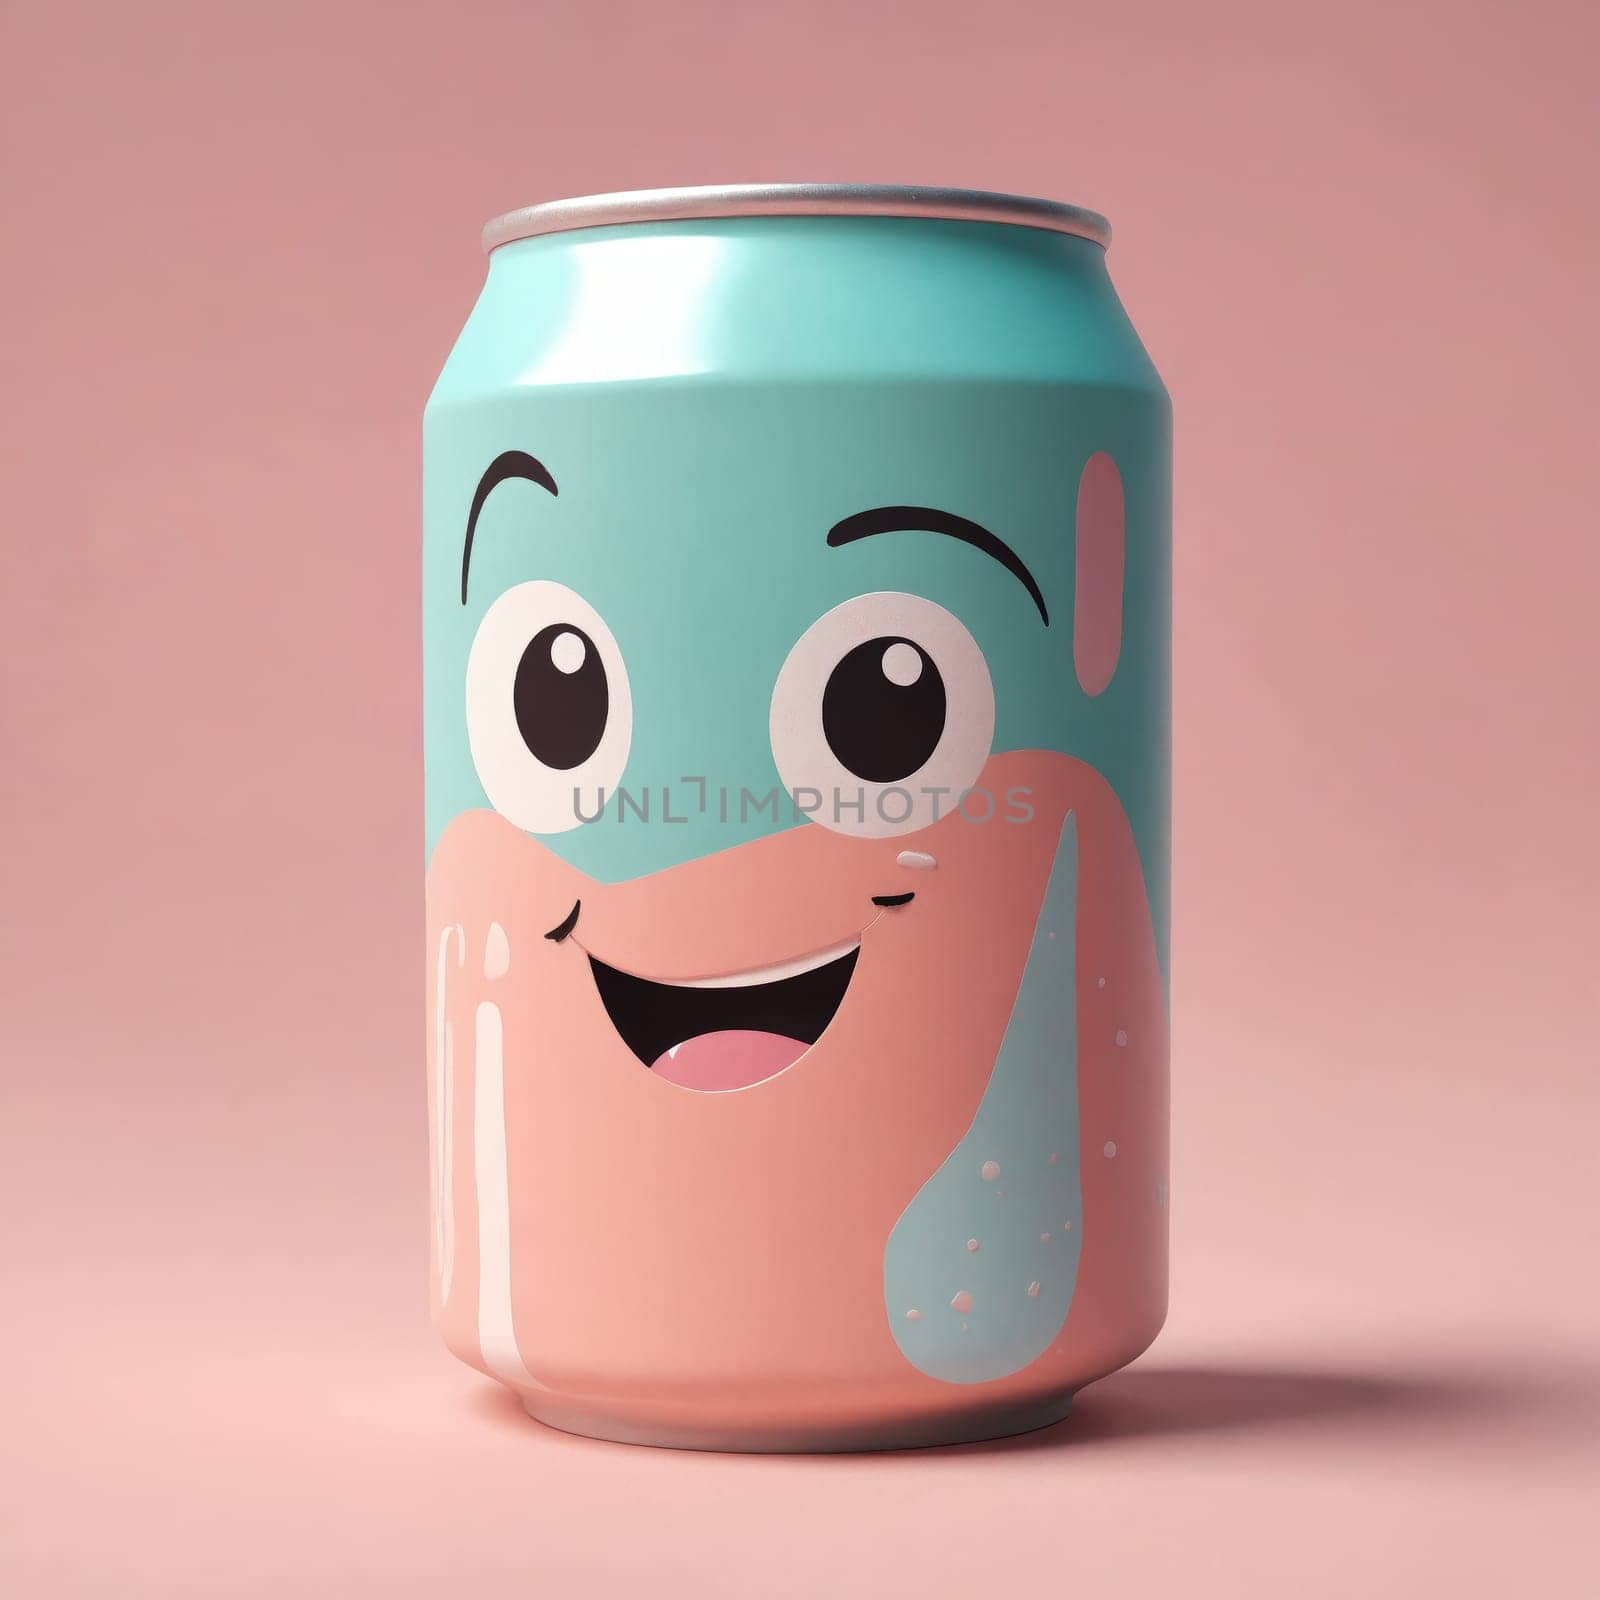 Cartoonfaced soda can with electric blue font and a big smile by Andre1ns